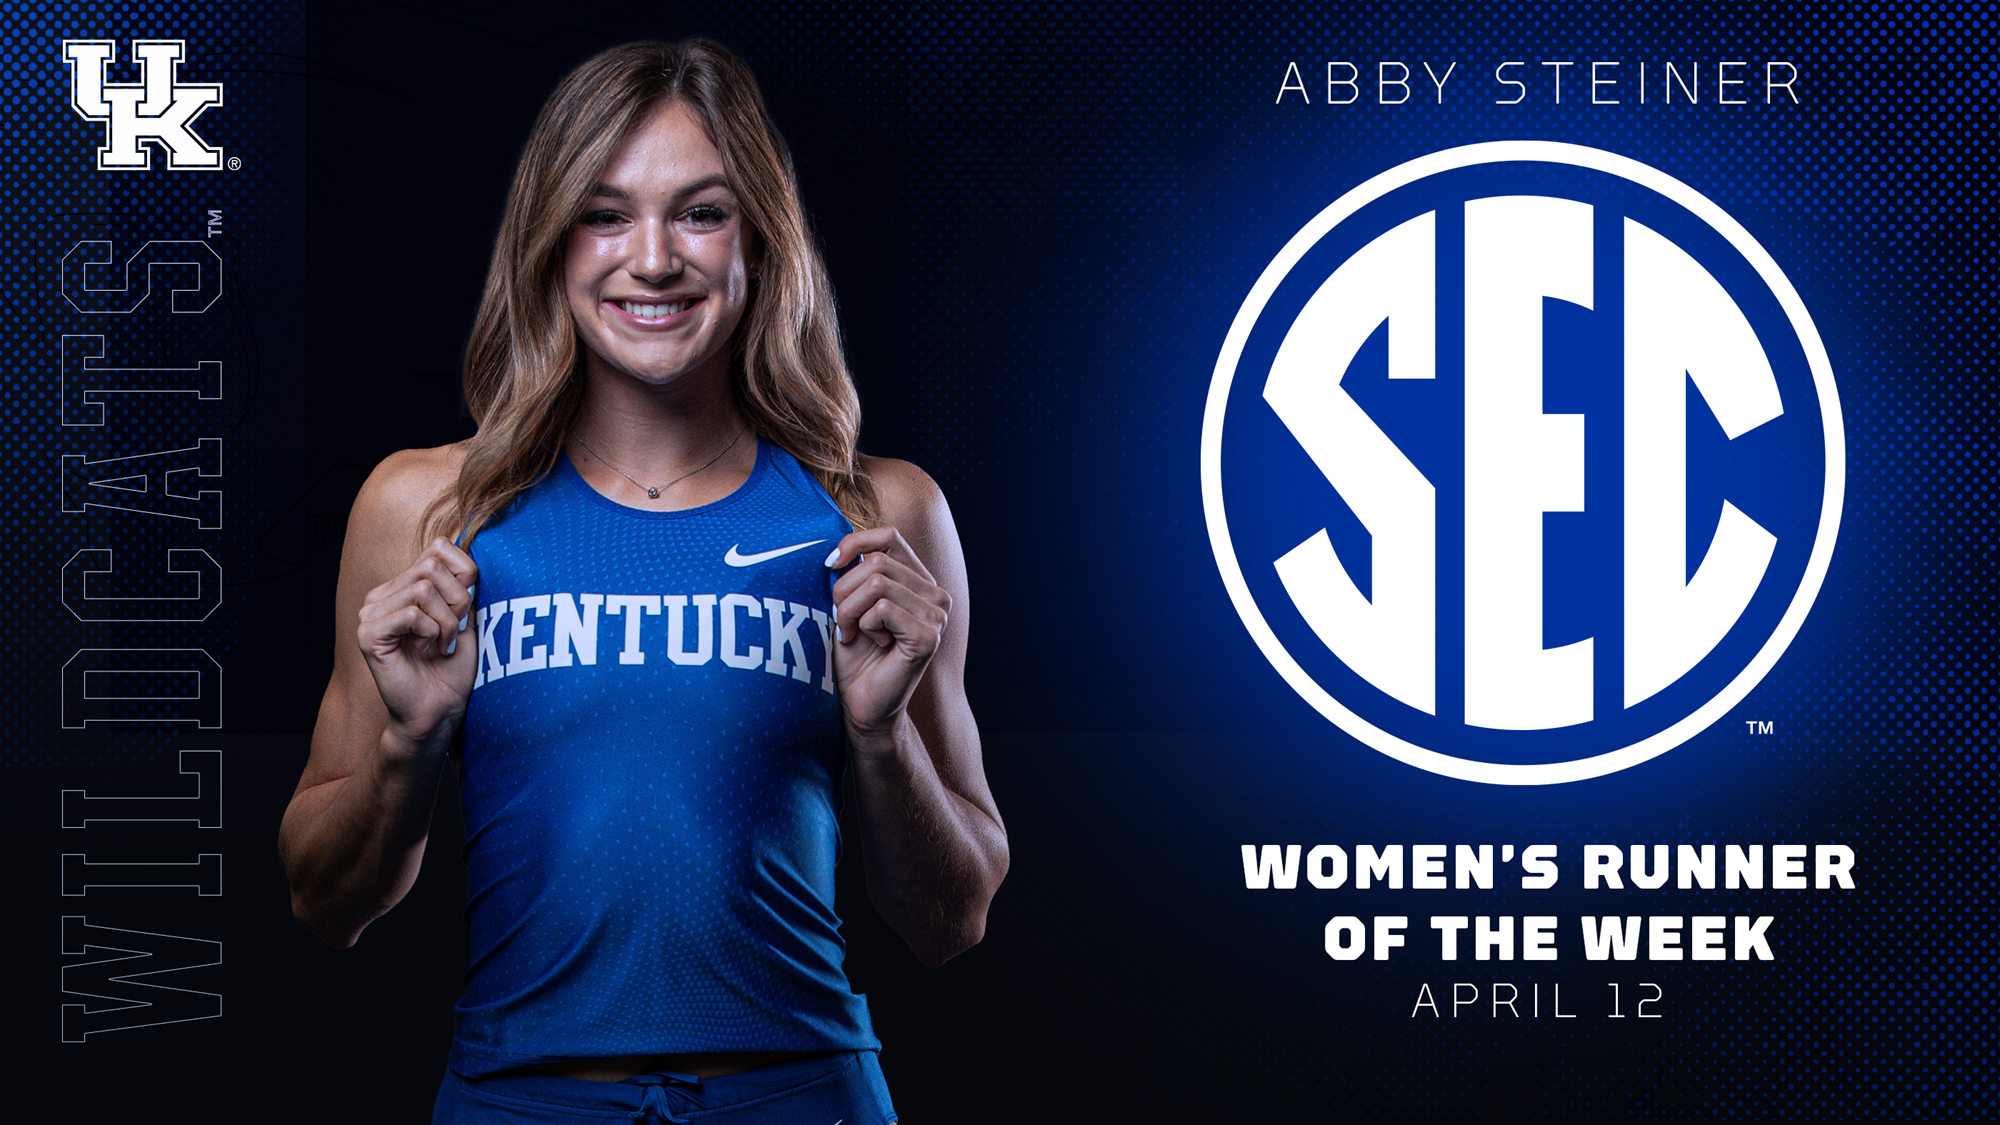 Abby Steiner Wins National and SEC Runner of the Week